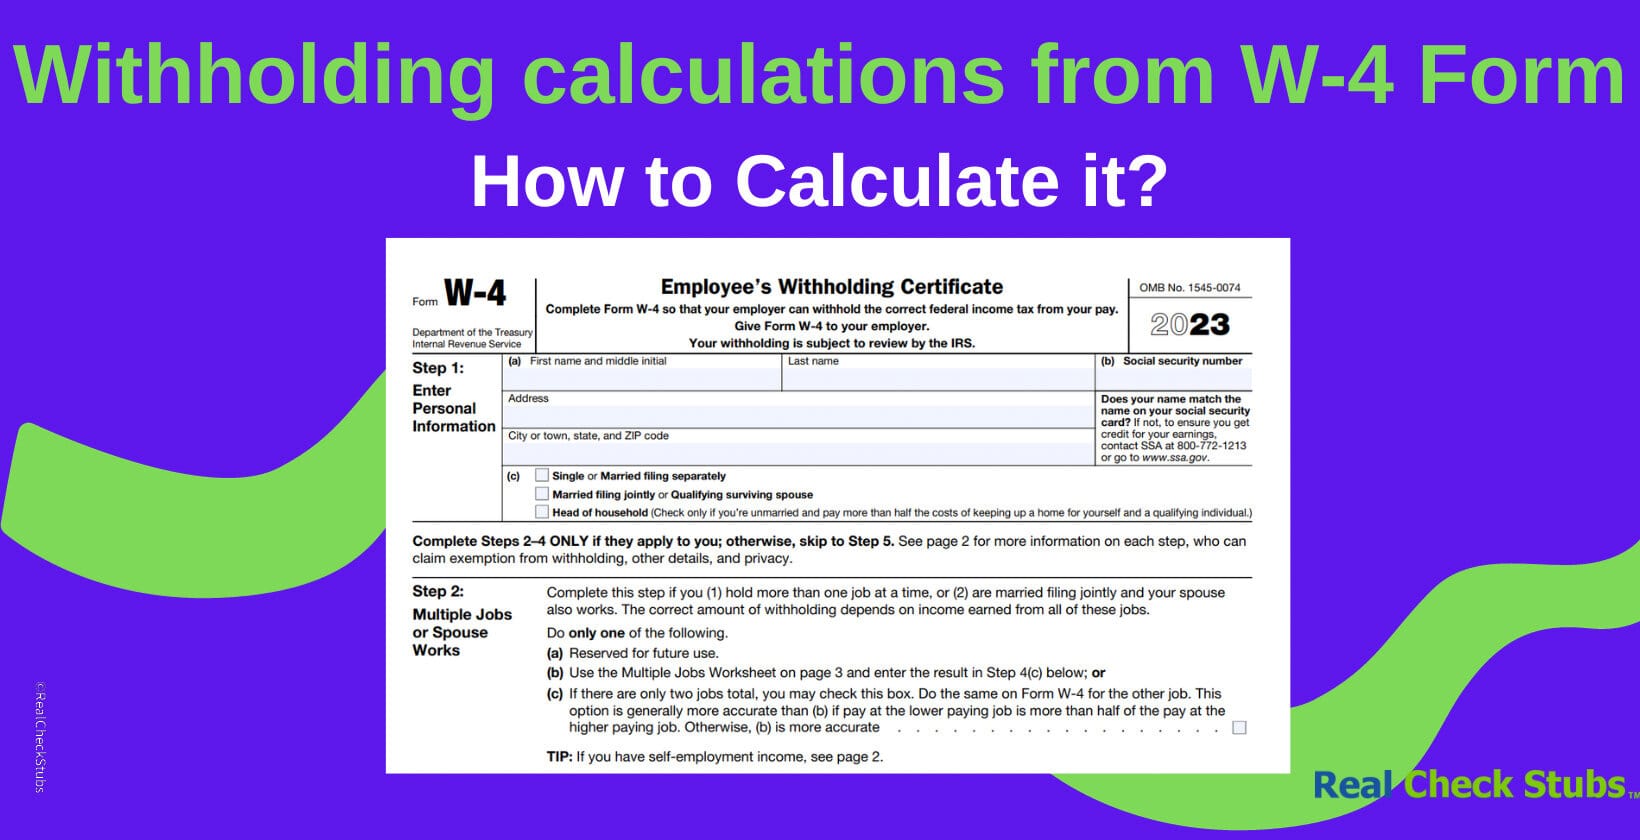 Withholding calculations based on Previous W-4 Form